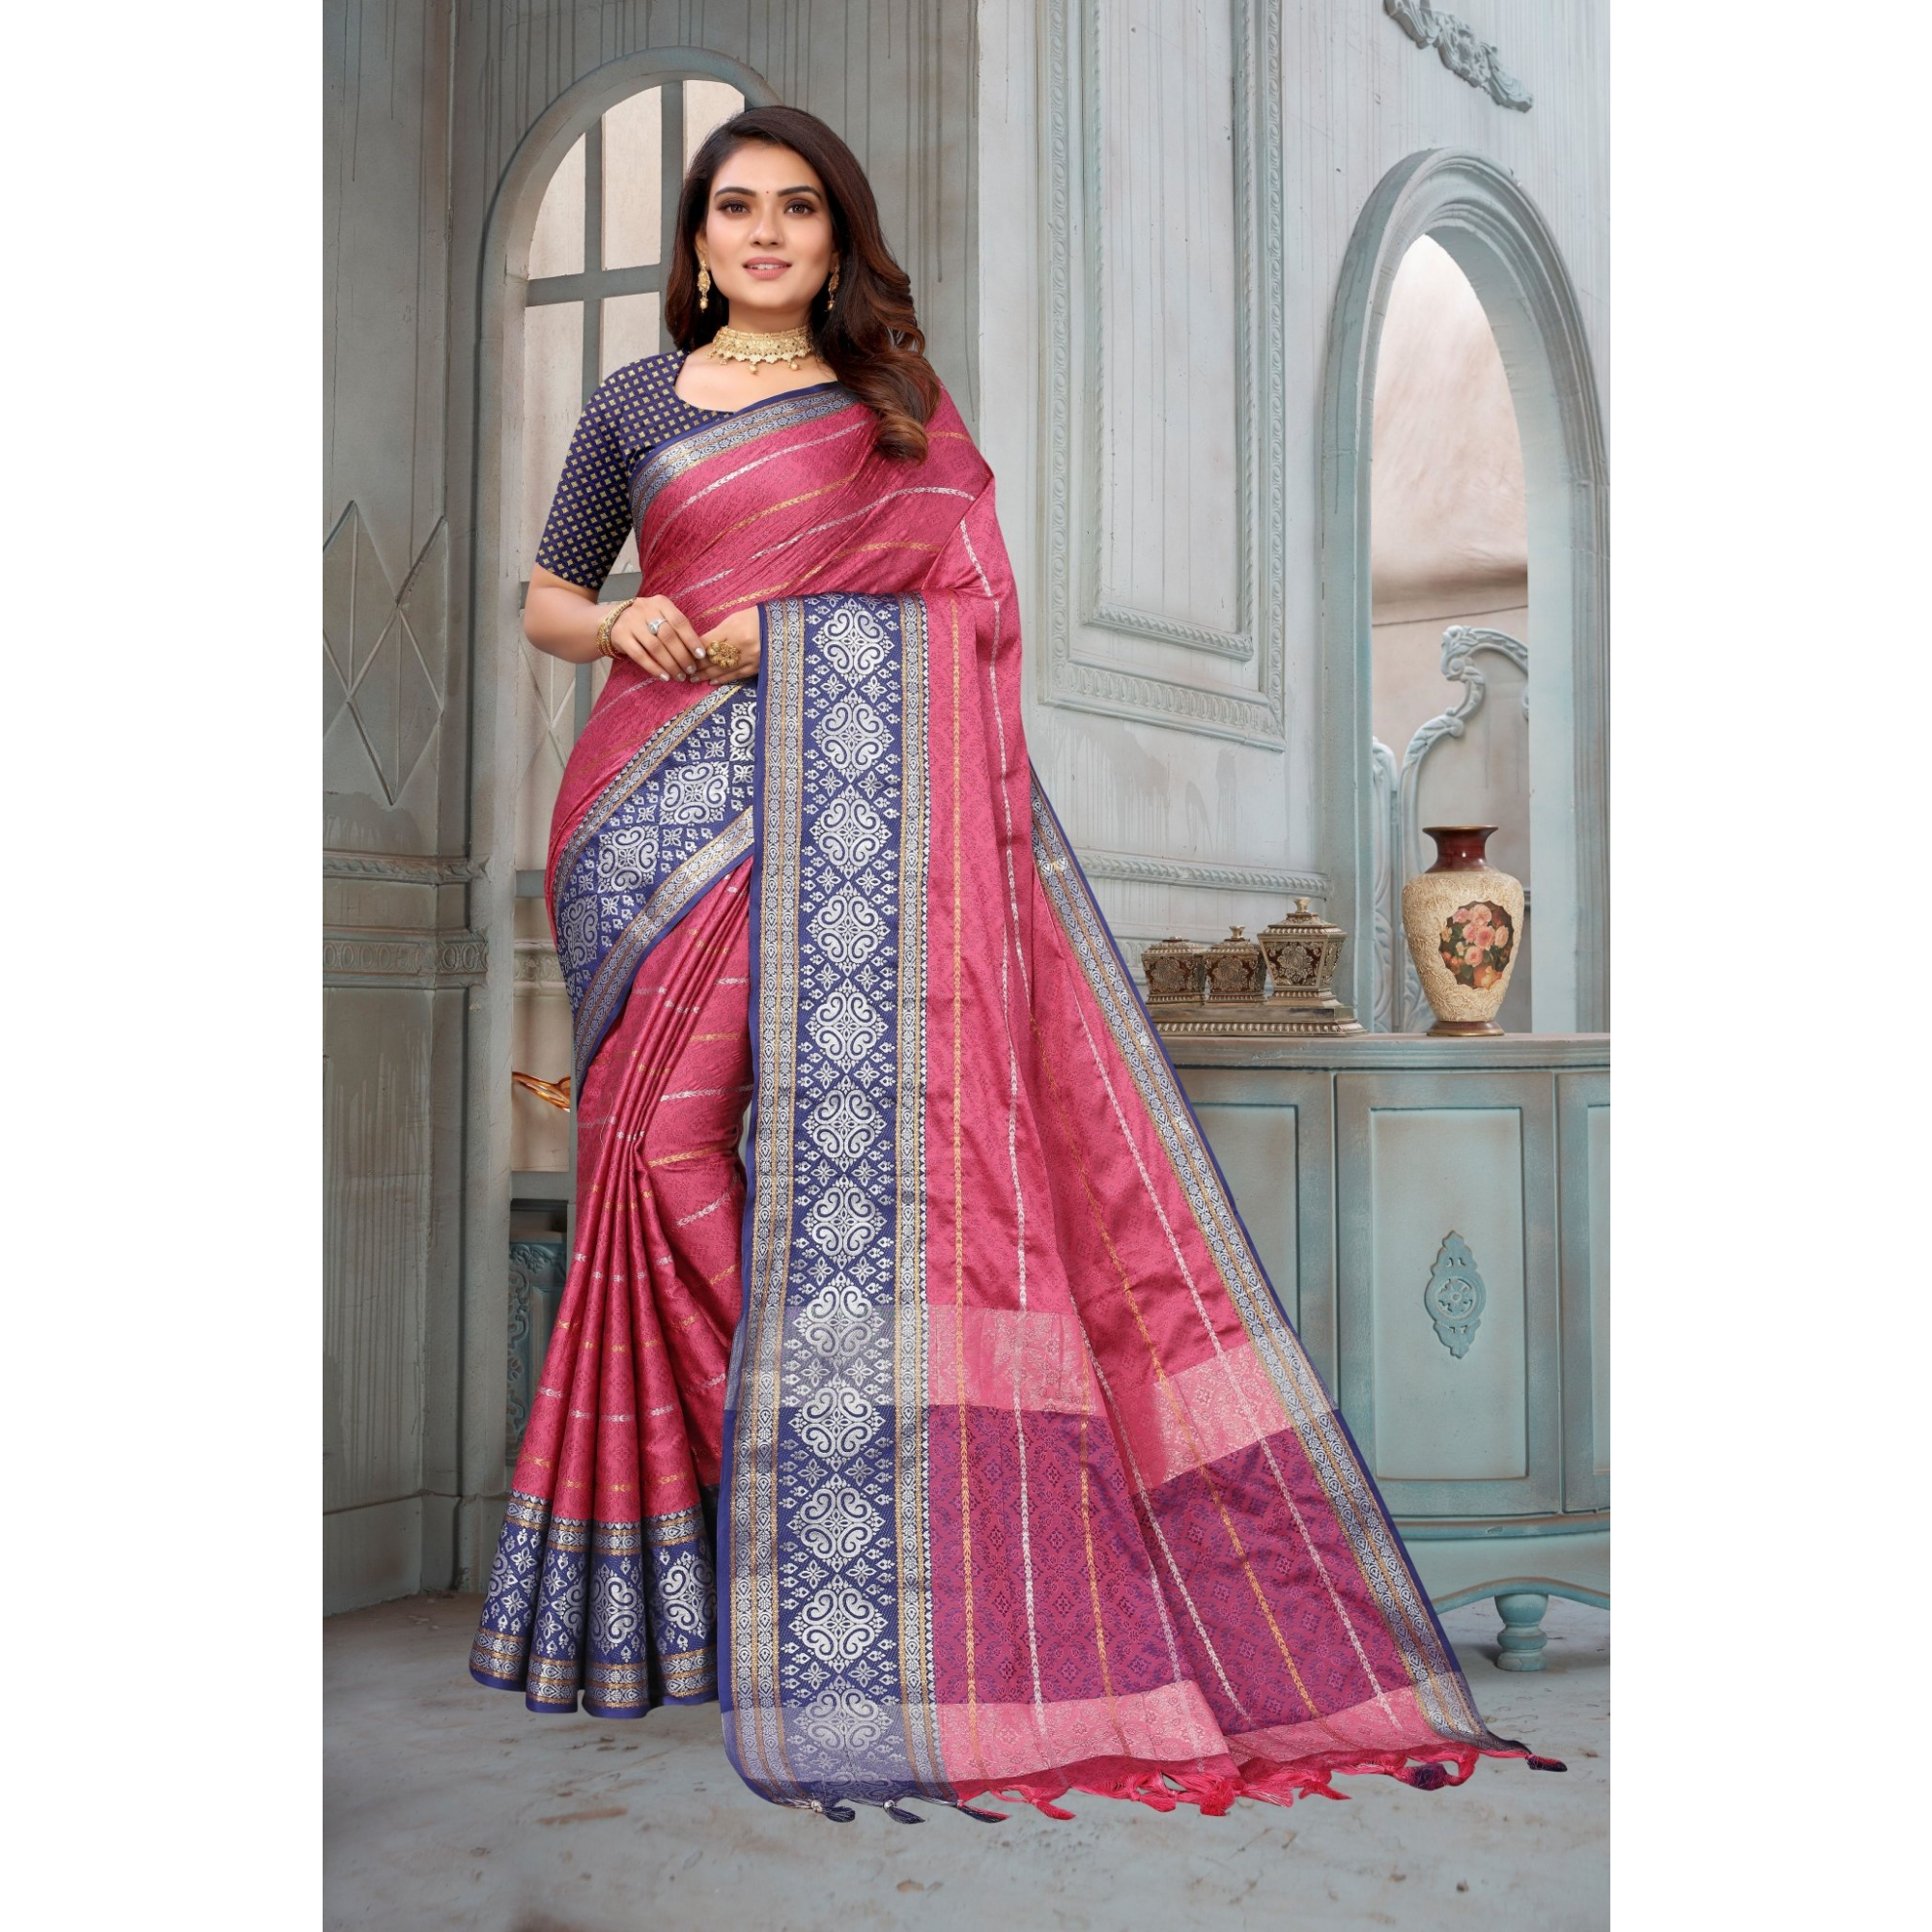 Women's Designer Saree with fancy jhallar with Blouse Piece Pink with Blue border - TheHangr